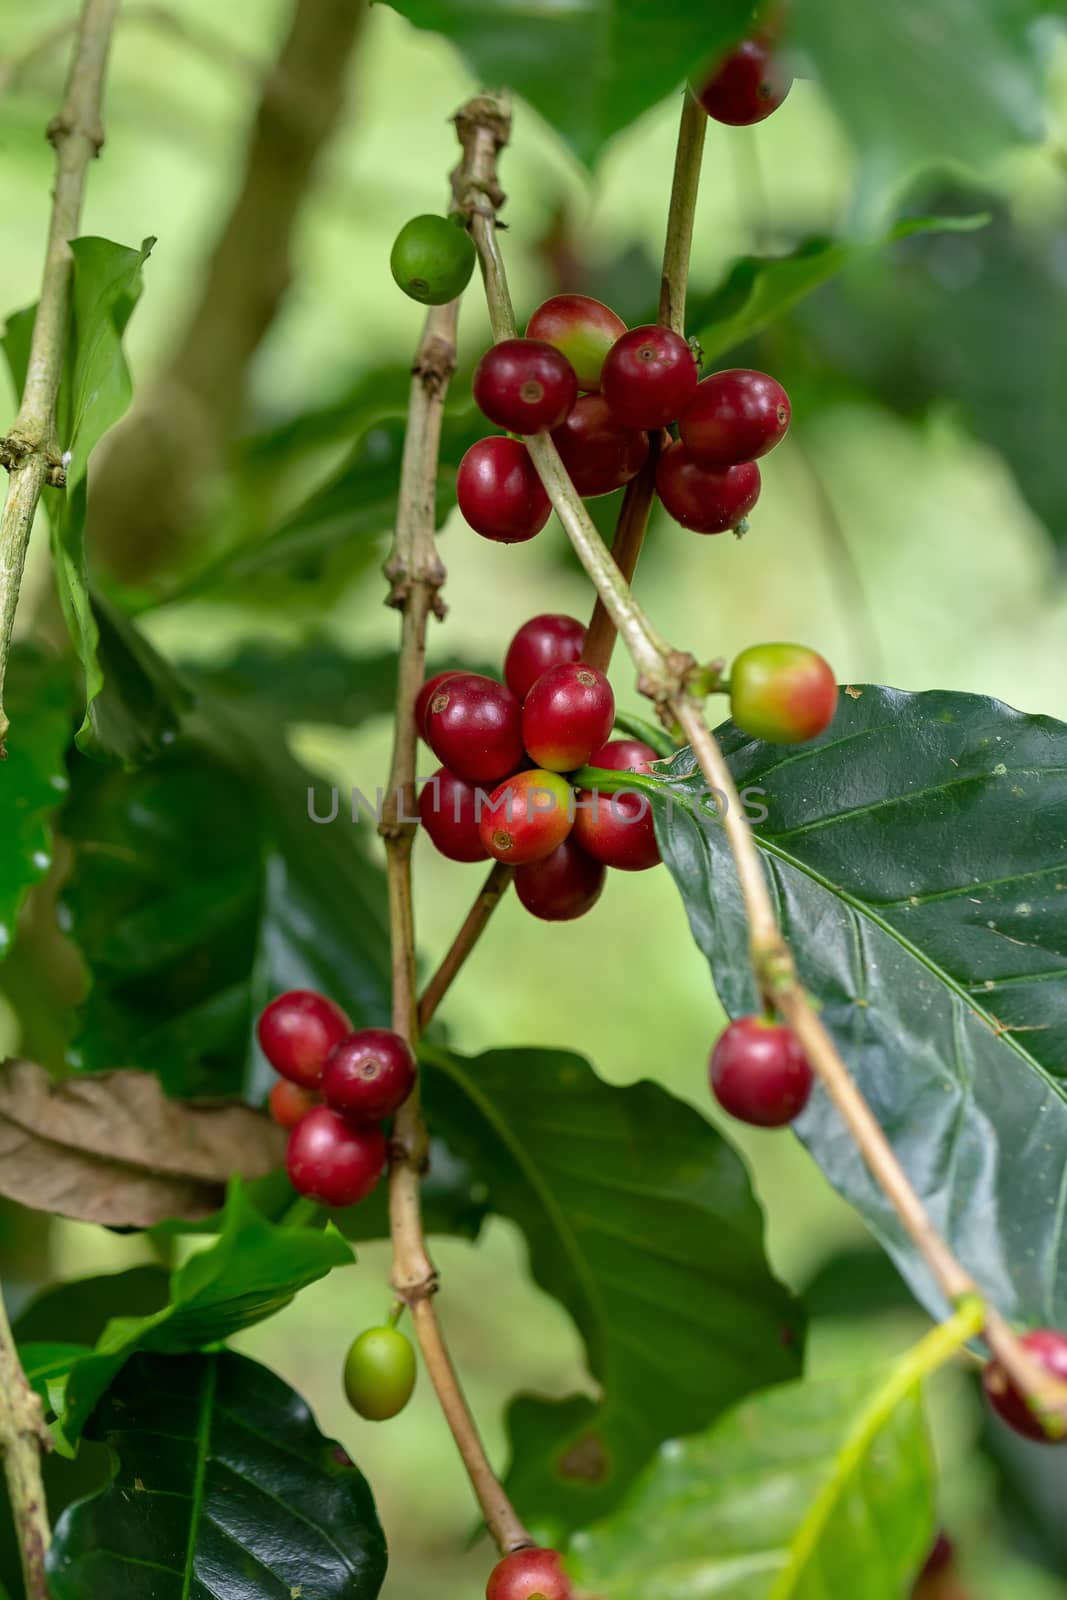 Fresh Arabica Coffee beans ripening on tree in the agricultural garden north of thailand.